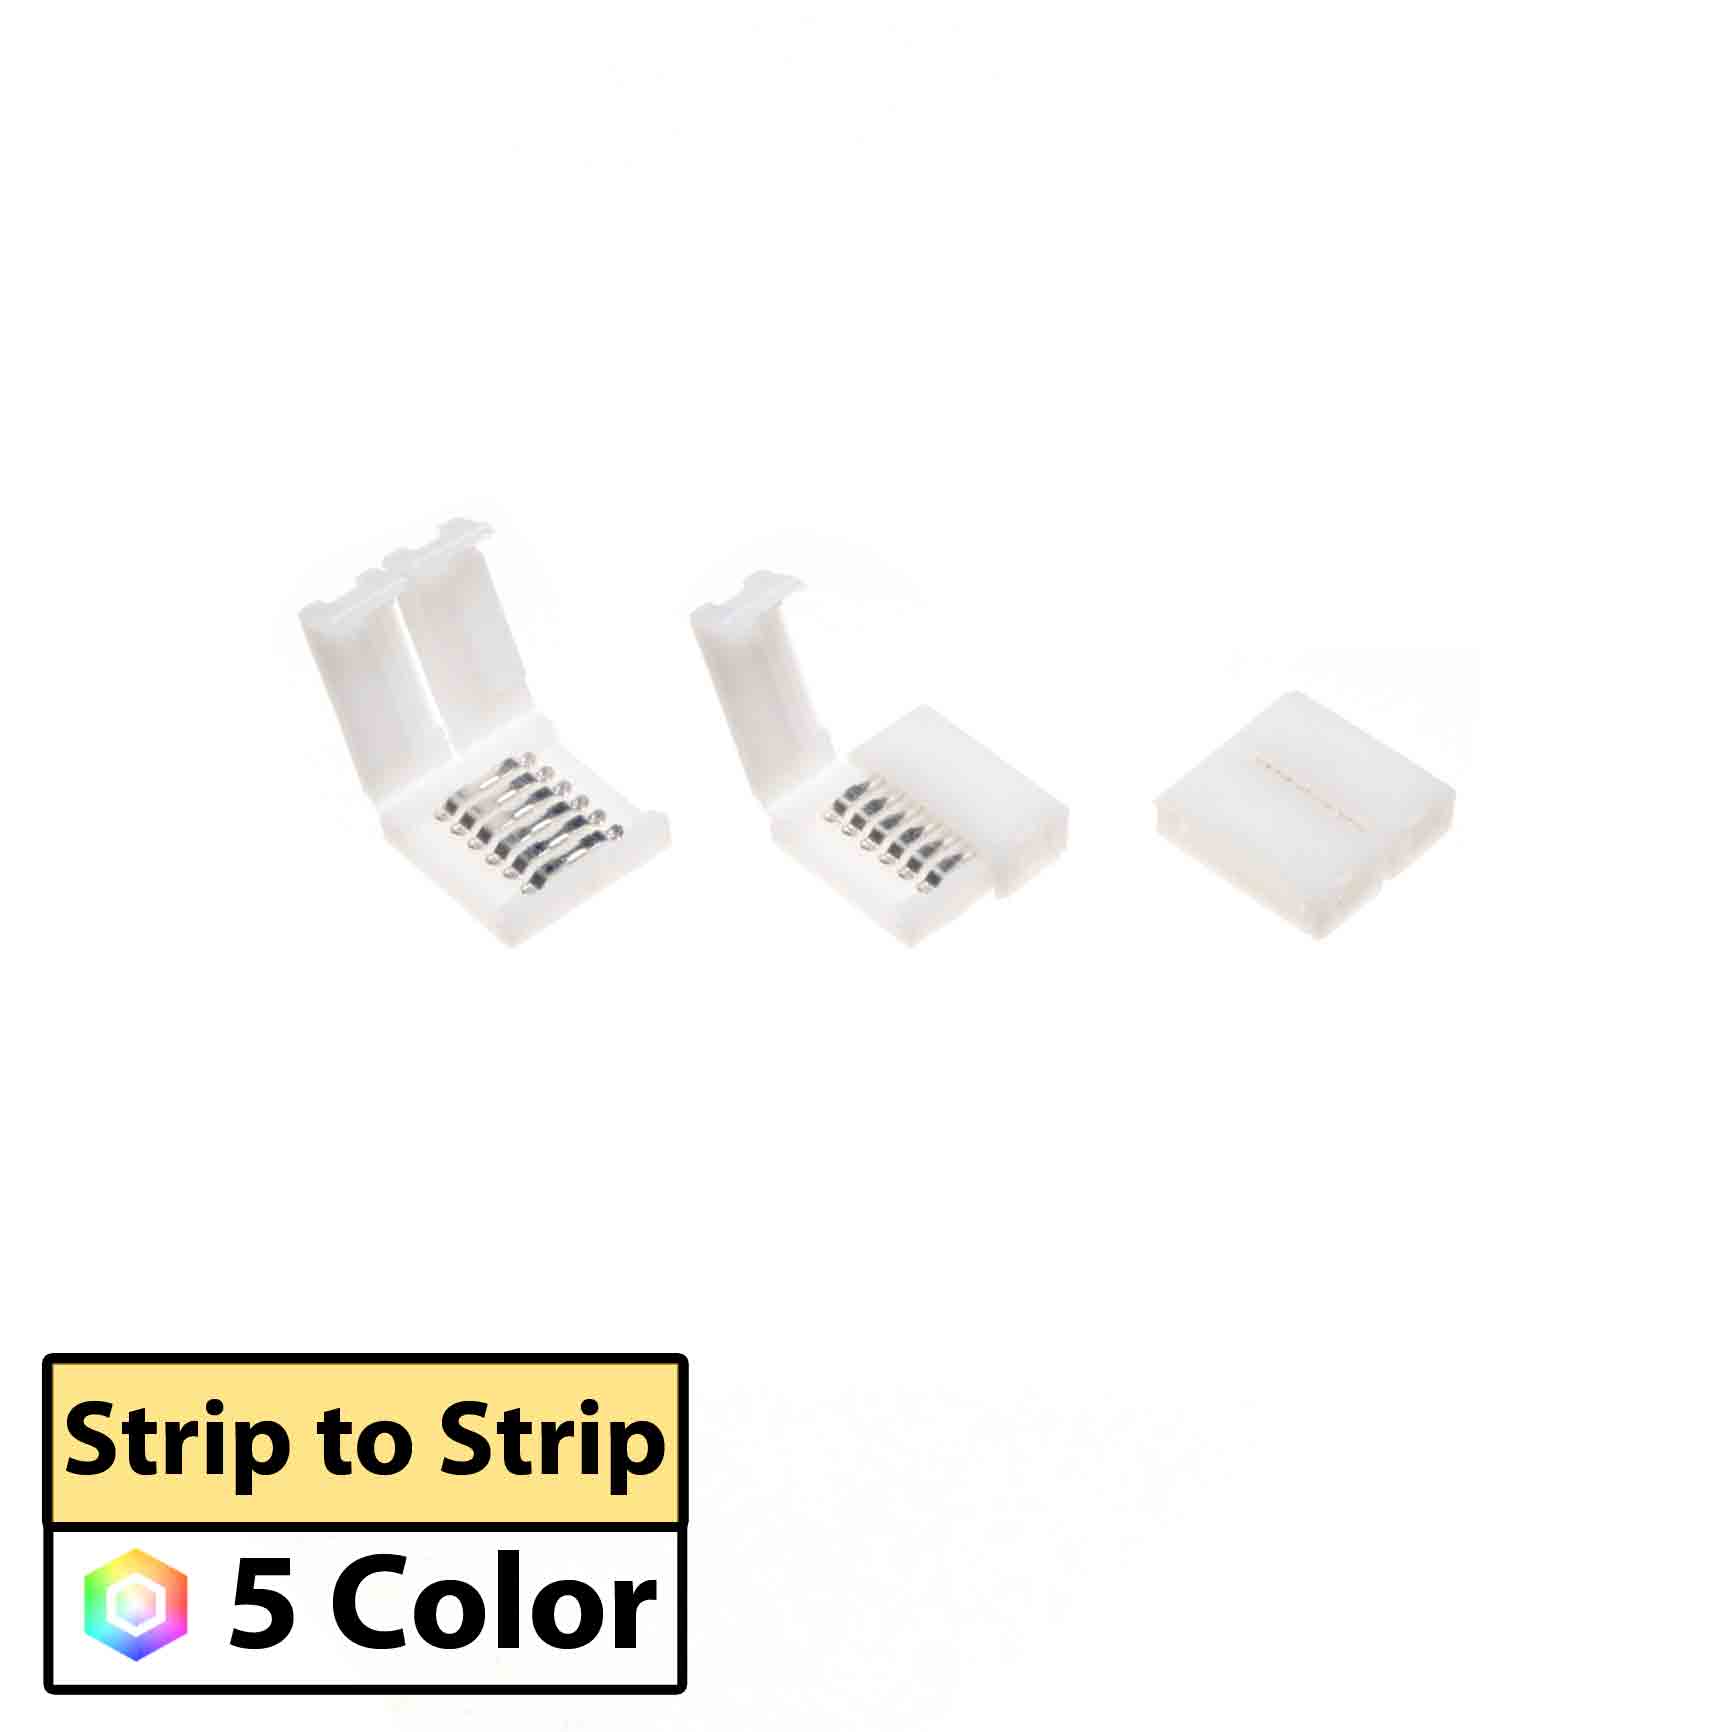 I have a LED strip light connected to a blue white wire like this without  plug. How should i install the plug so i can light up the led strip? :  r/malaysians